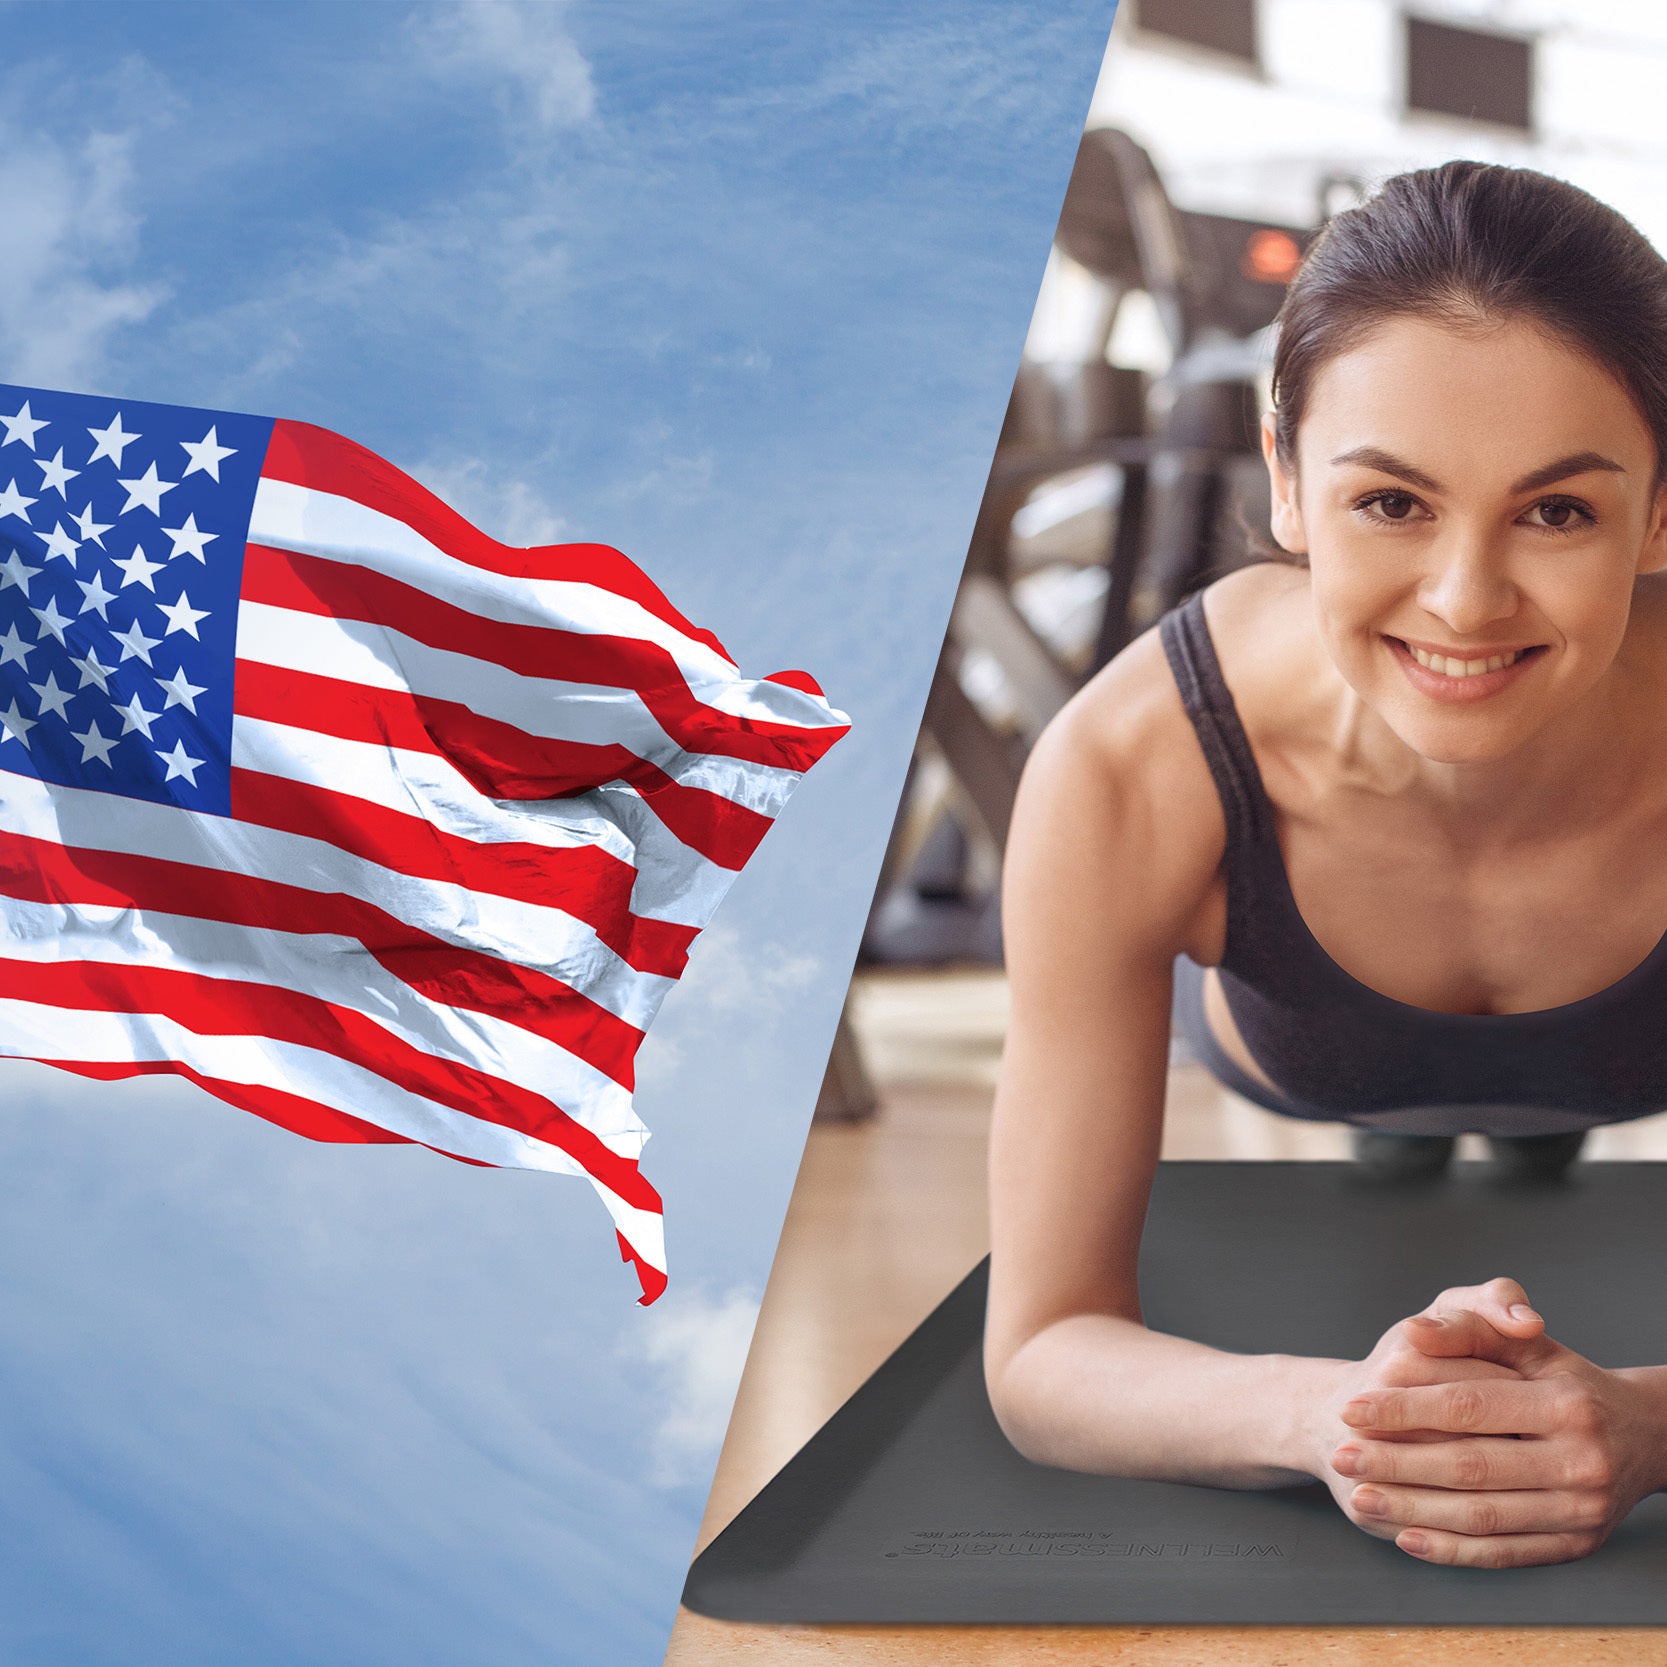 American Flag and woman doing planks on FitnessMat.